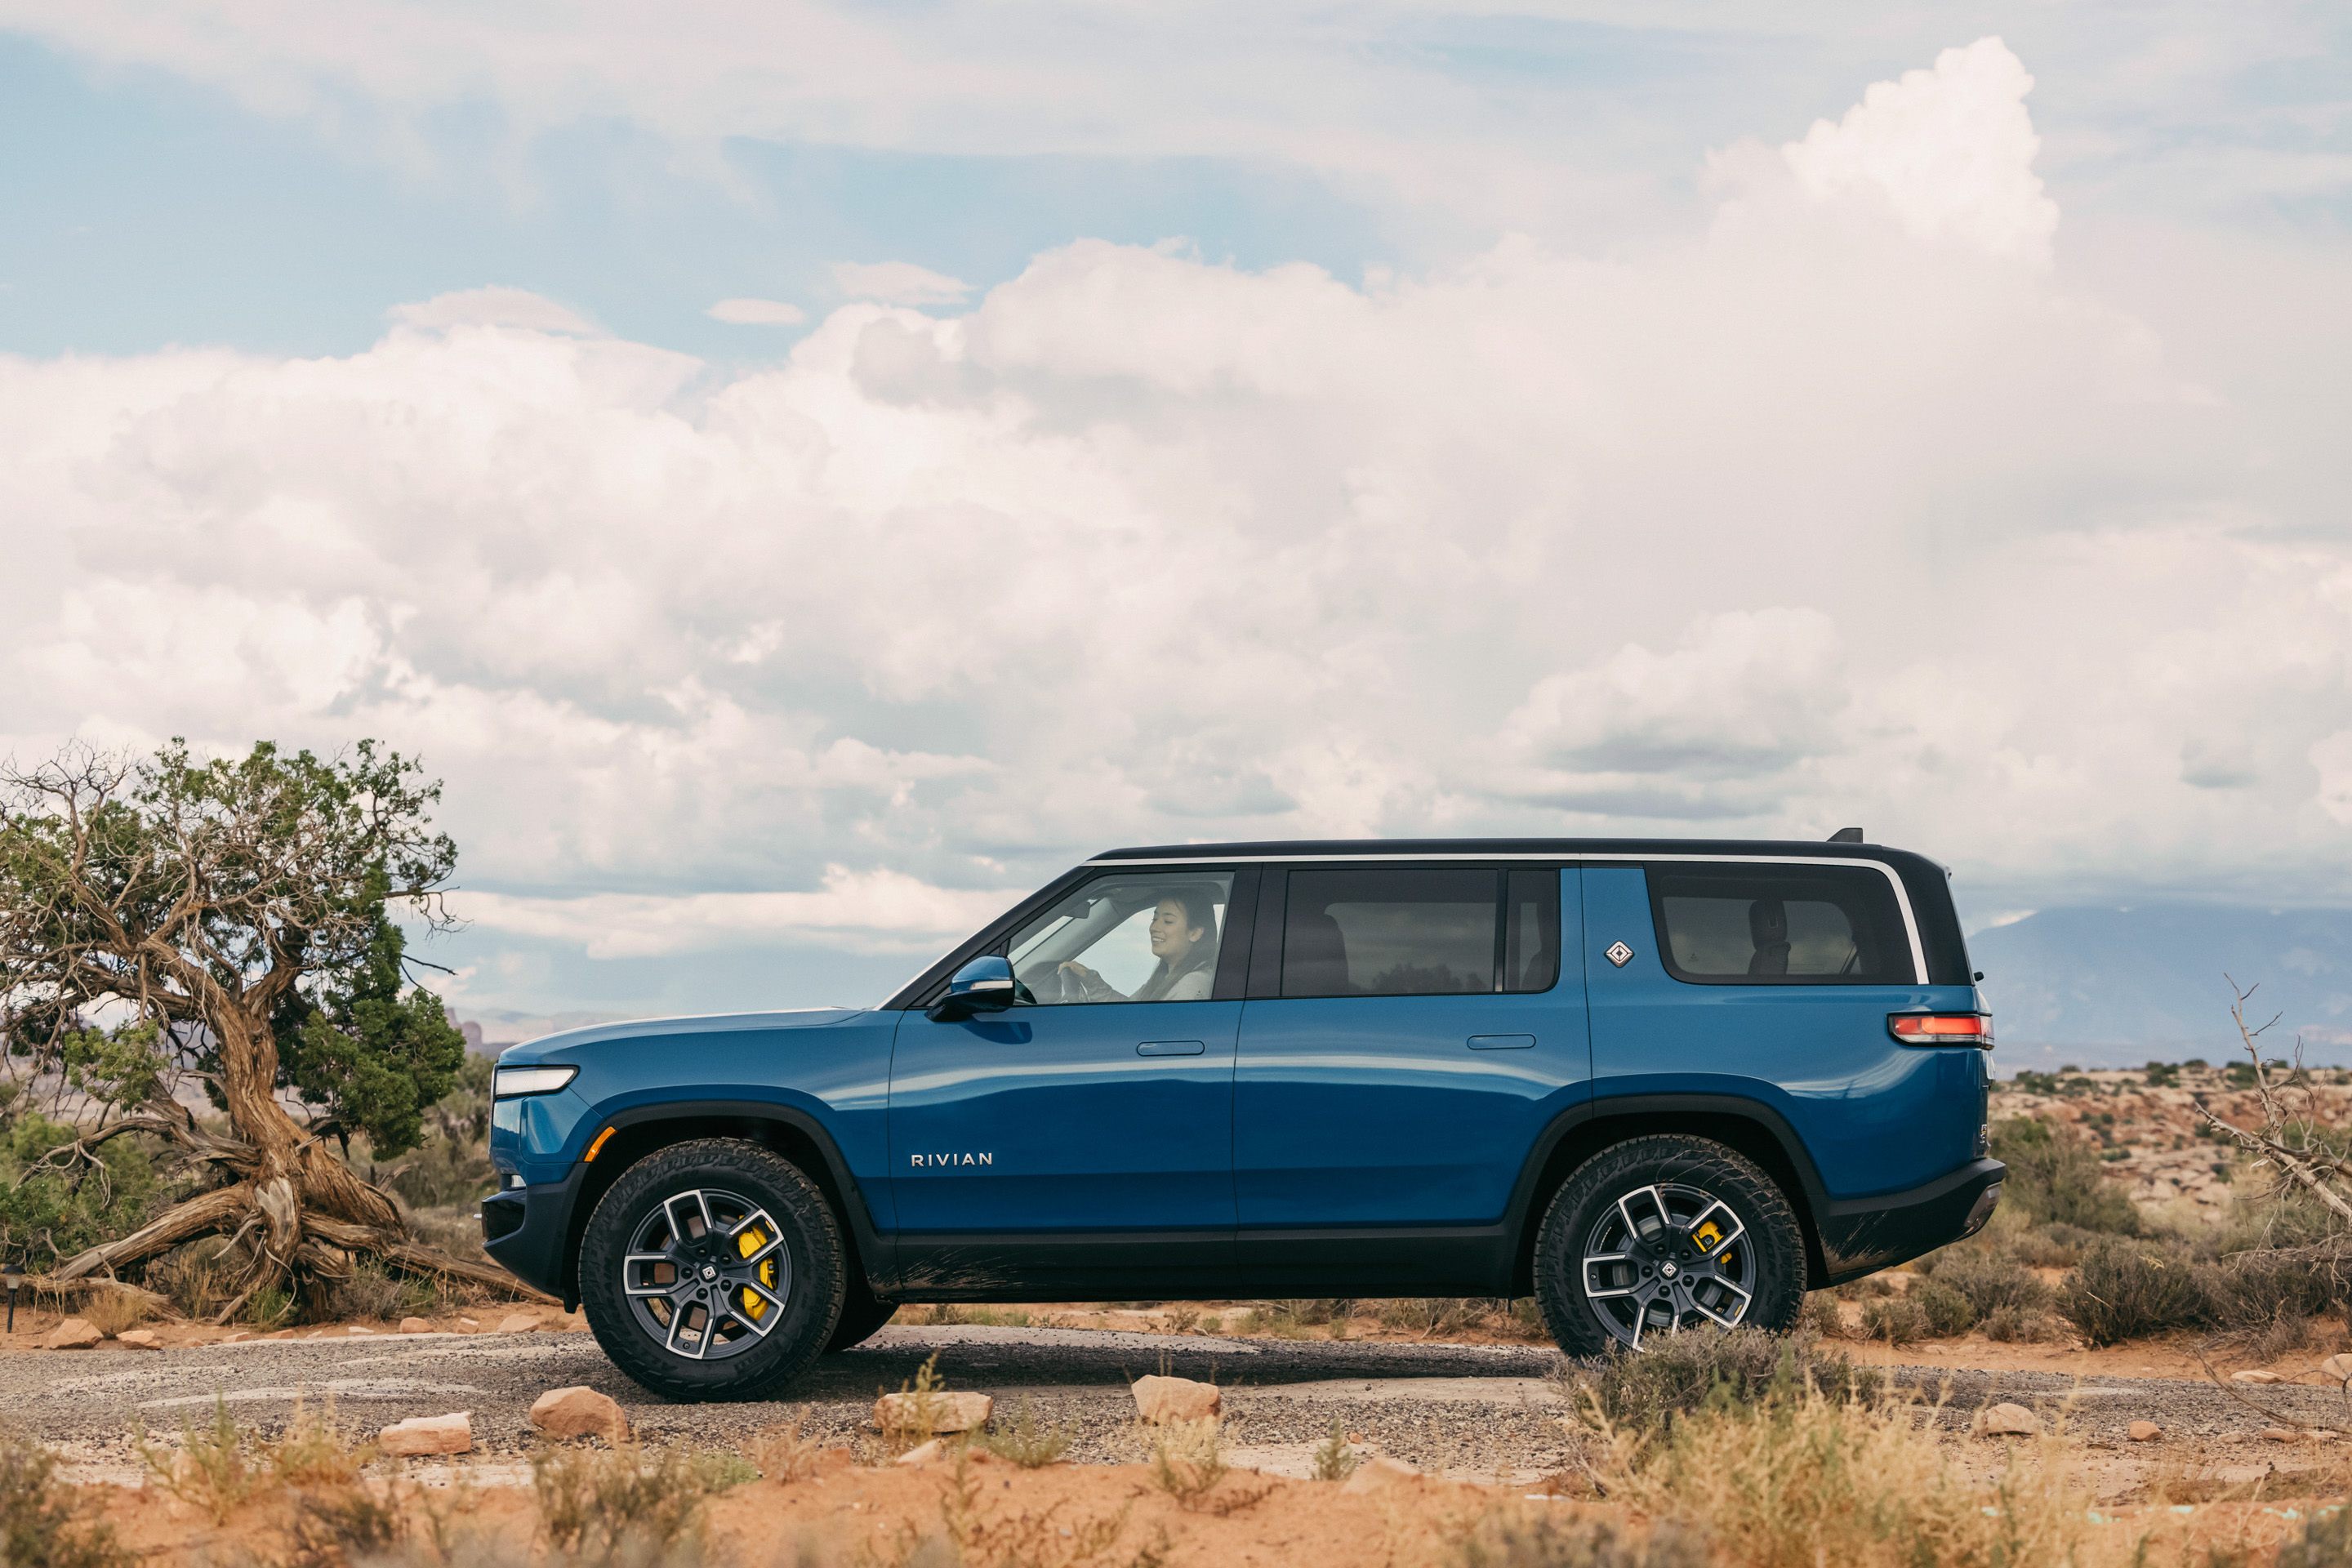 The best three-row electric SUVs like this Rivian R1S